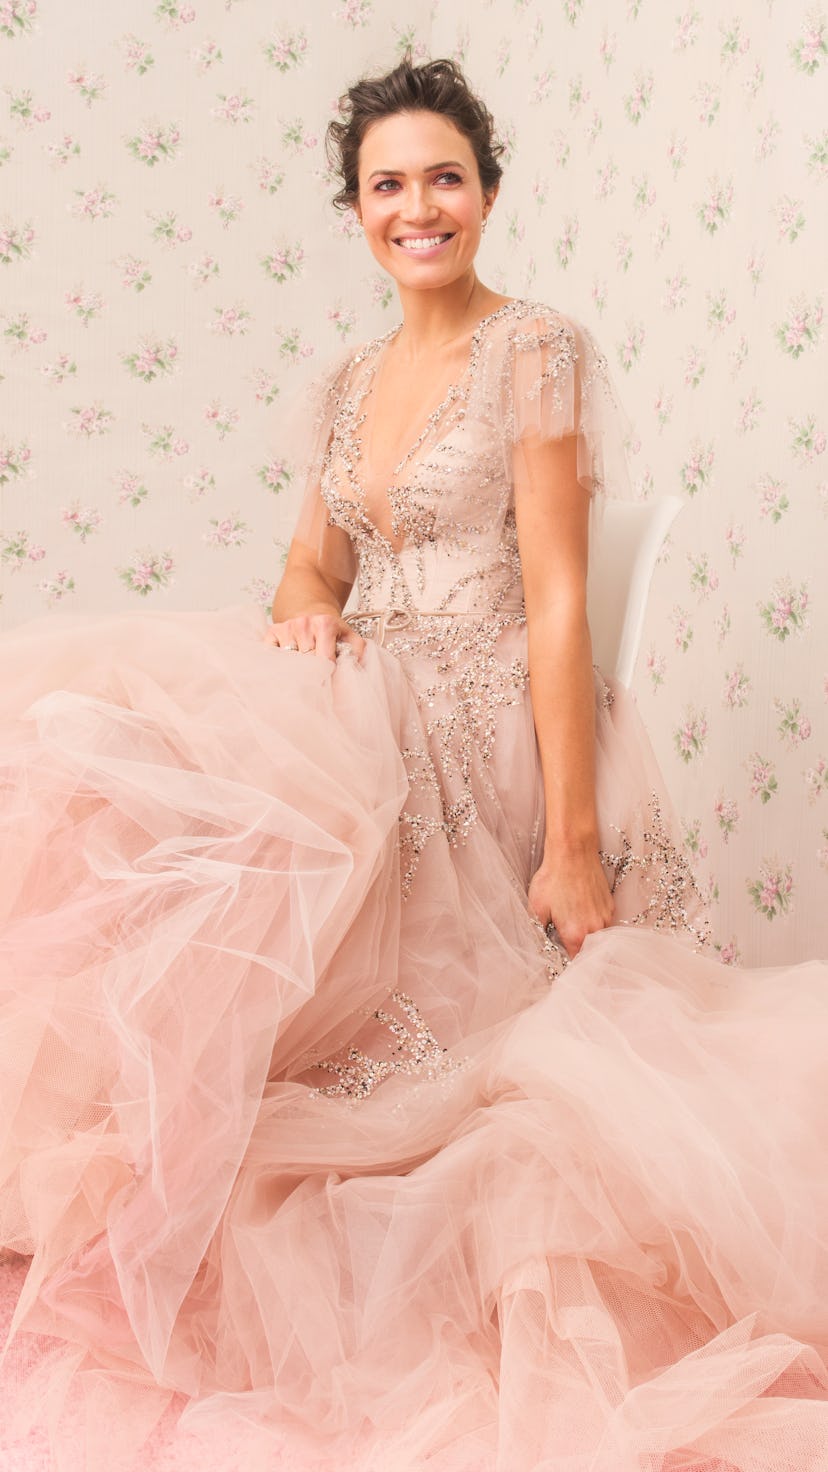 Mandy Moore in a blush pink tulle and sequin gown